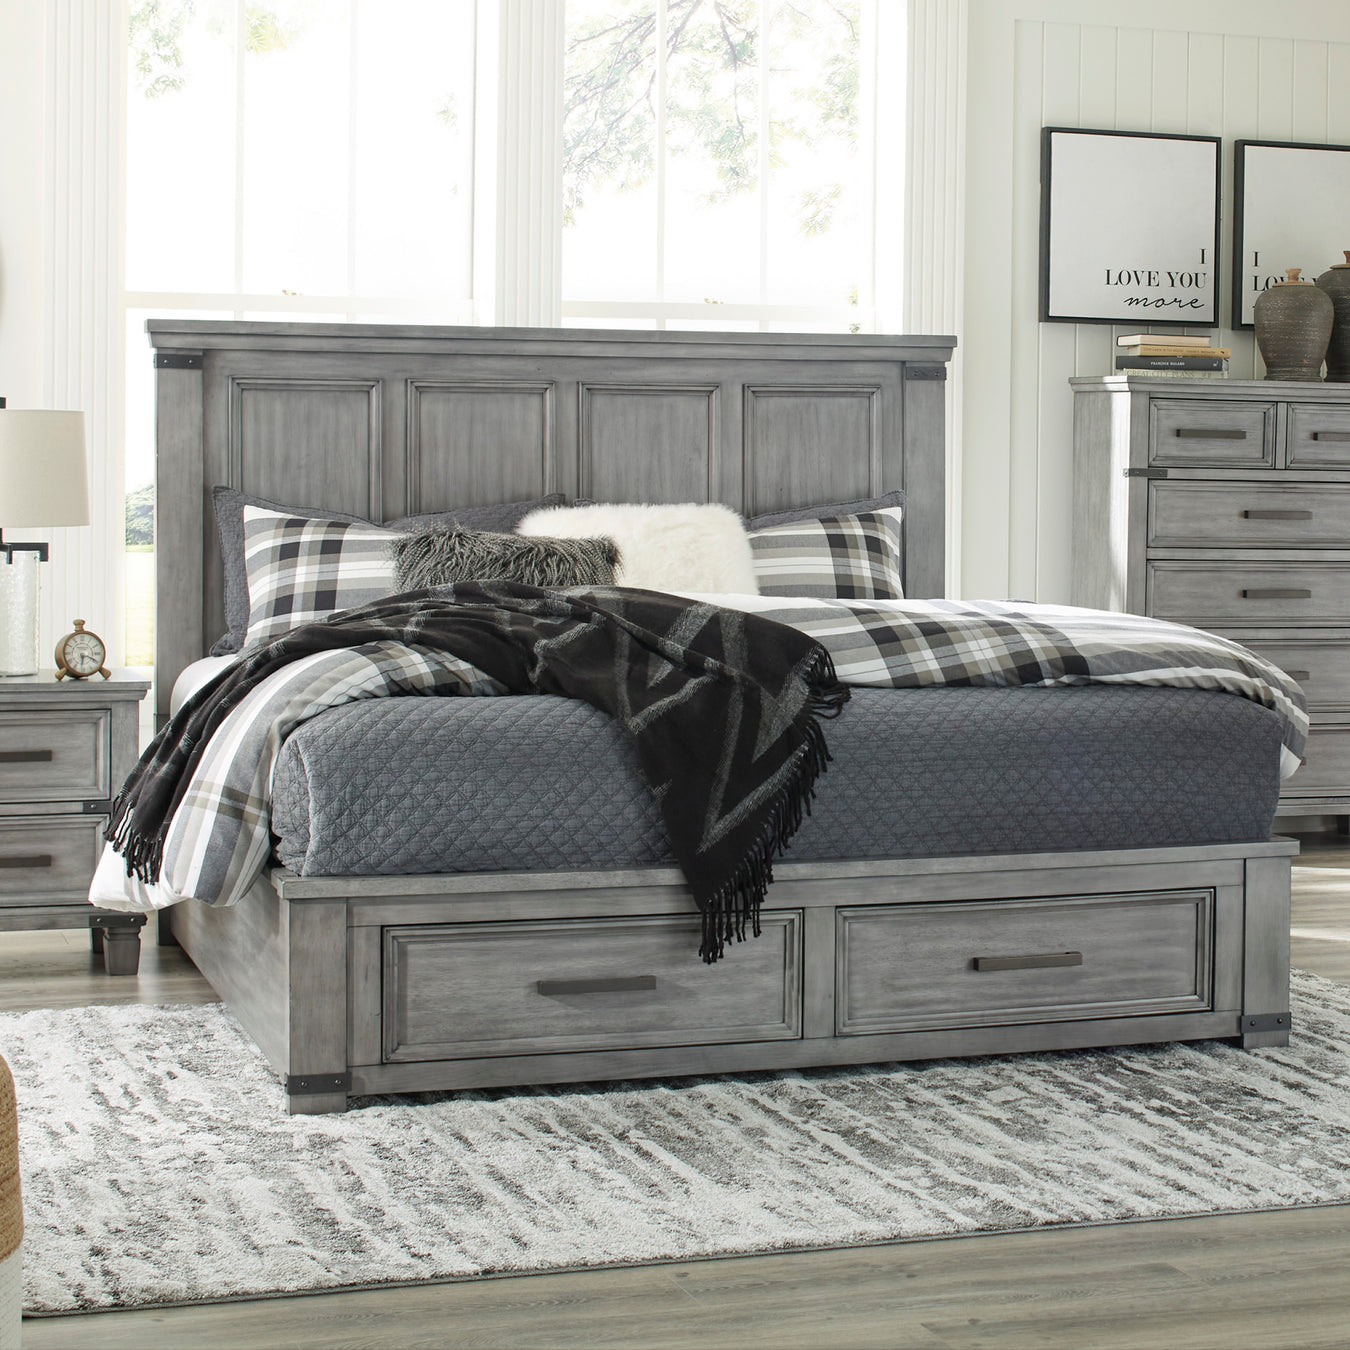 Shop Bedroom Furniture at the #1 Discount Furniture Store in Durham, NC